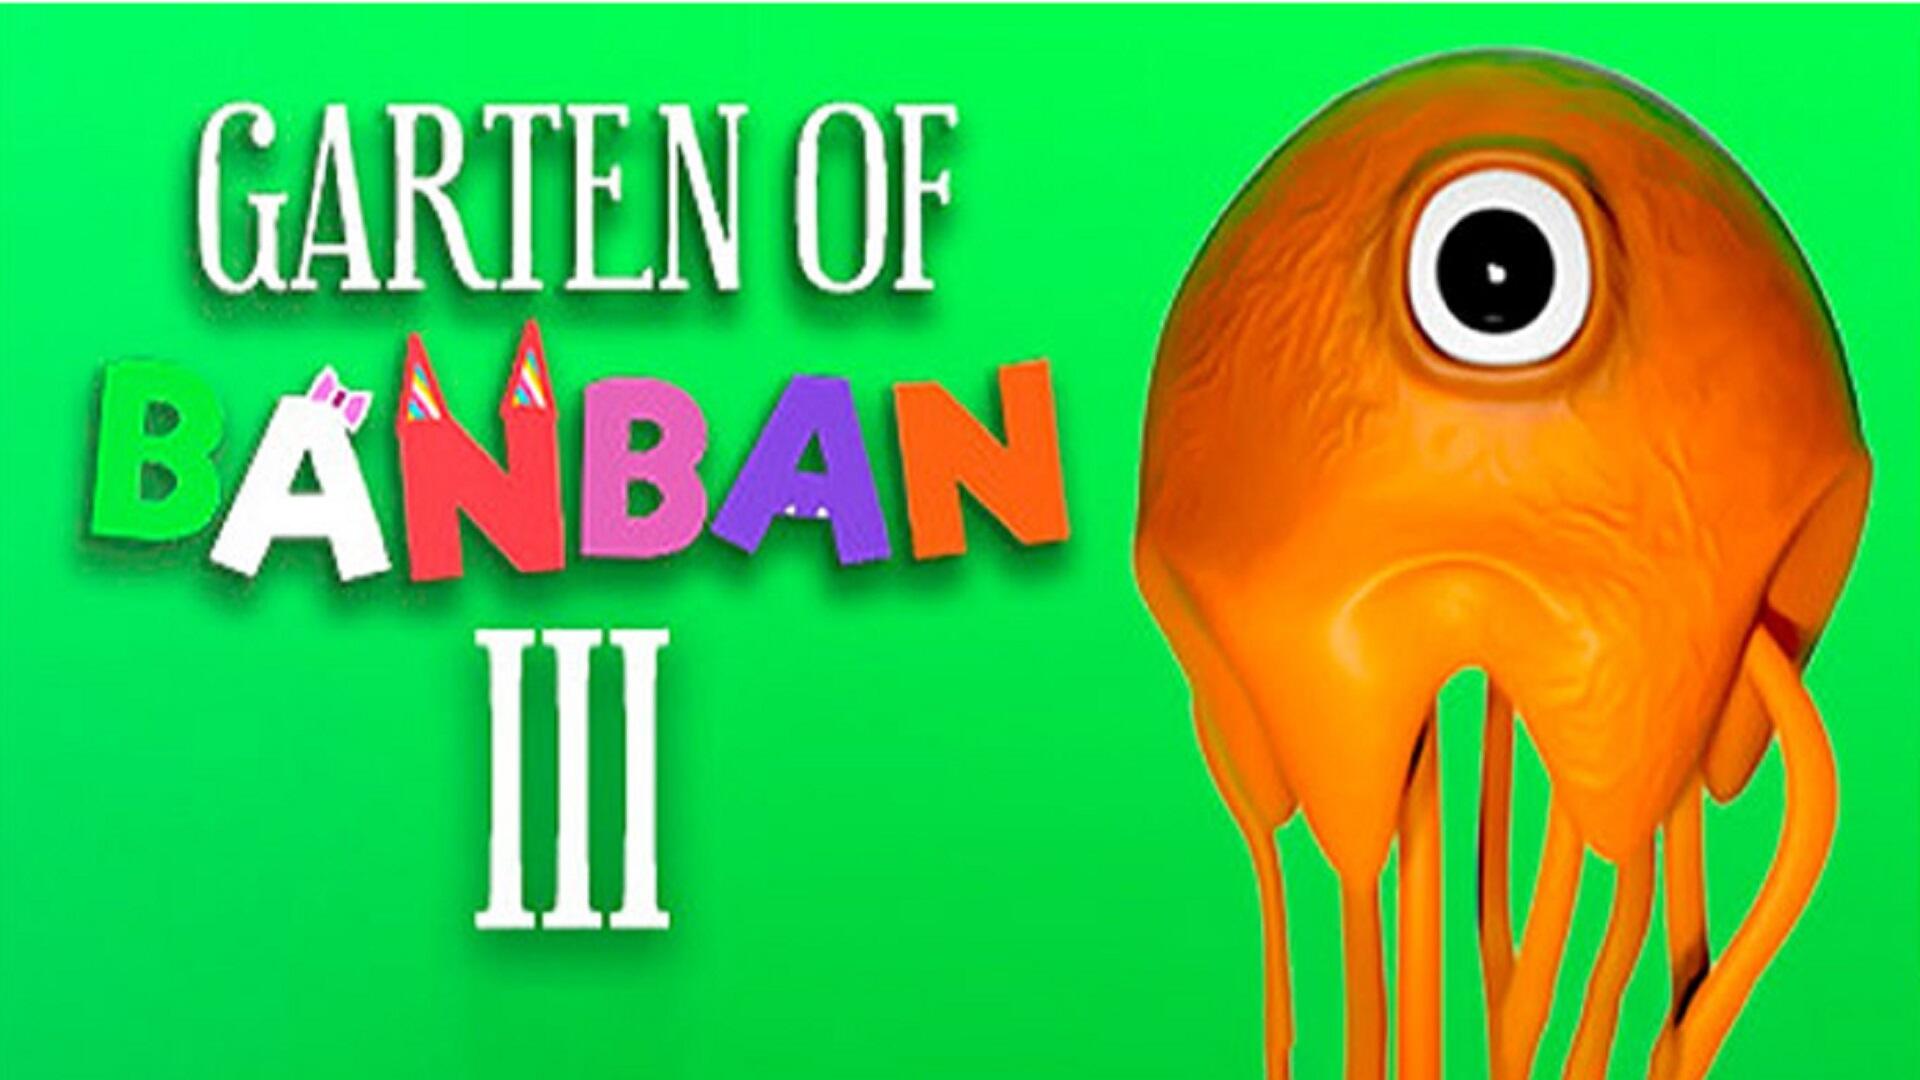 How to download Garten Of BanBan 3 for PC